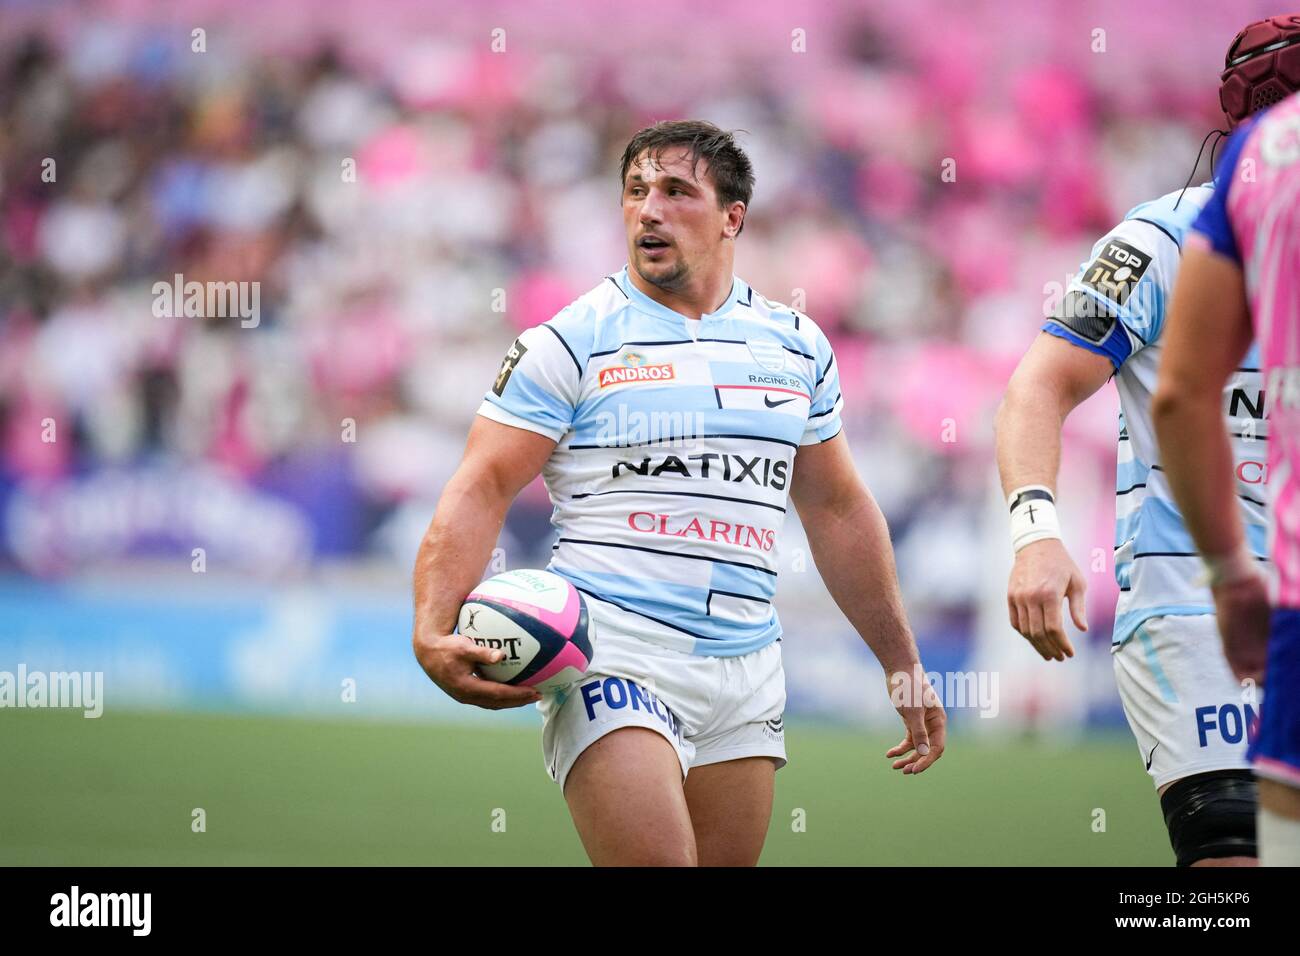 Camille CHAT of Racing 92 during the rugby TOP 14 match between Stade  Français Paris (SFP) and Racing 92 (R92) at the Jean Bouin Stadium, in  Paris, France on September 4, 2021.